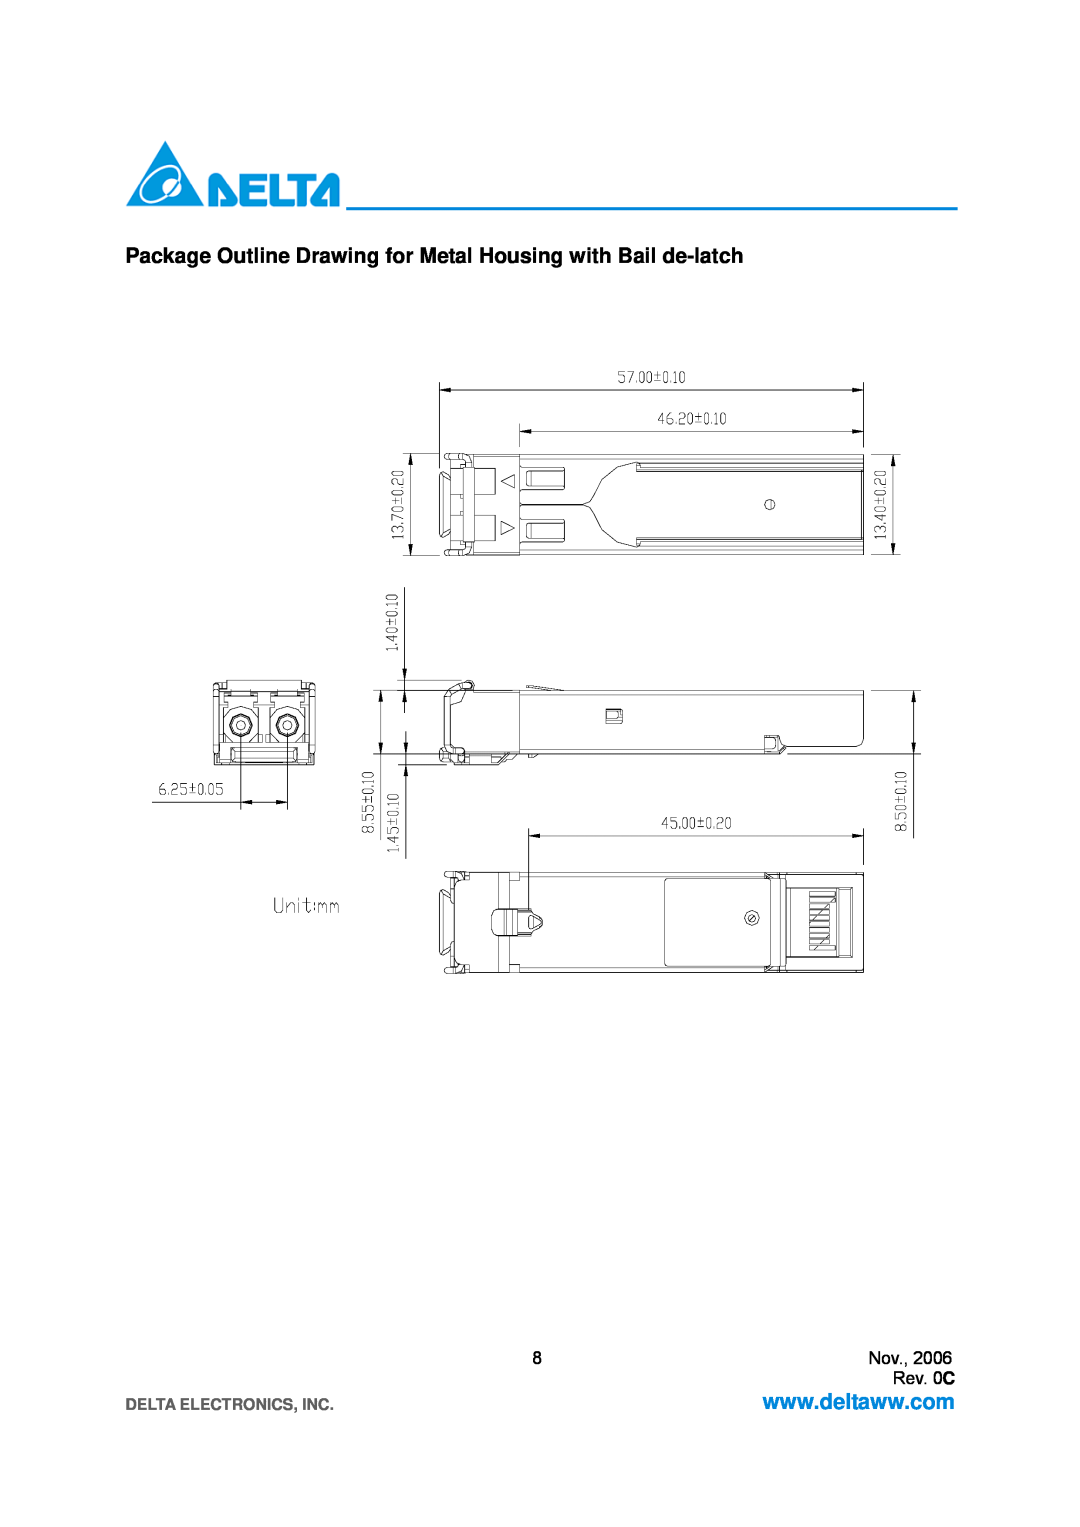 Delta Electronics LCP-1250A4FSRT, LCP-1250A4FSRH Package Outline Drawing for Metal Housing with Bail de-latch, Rev. 0C 